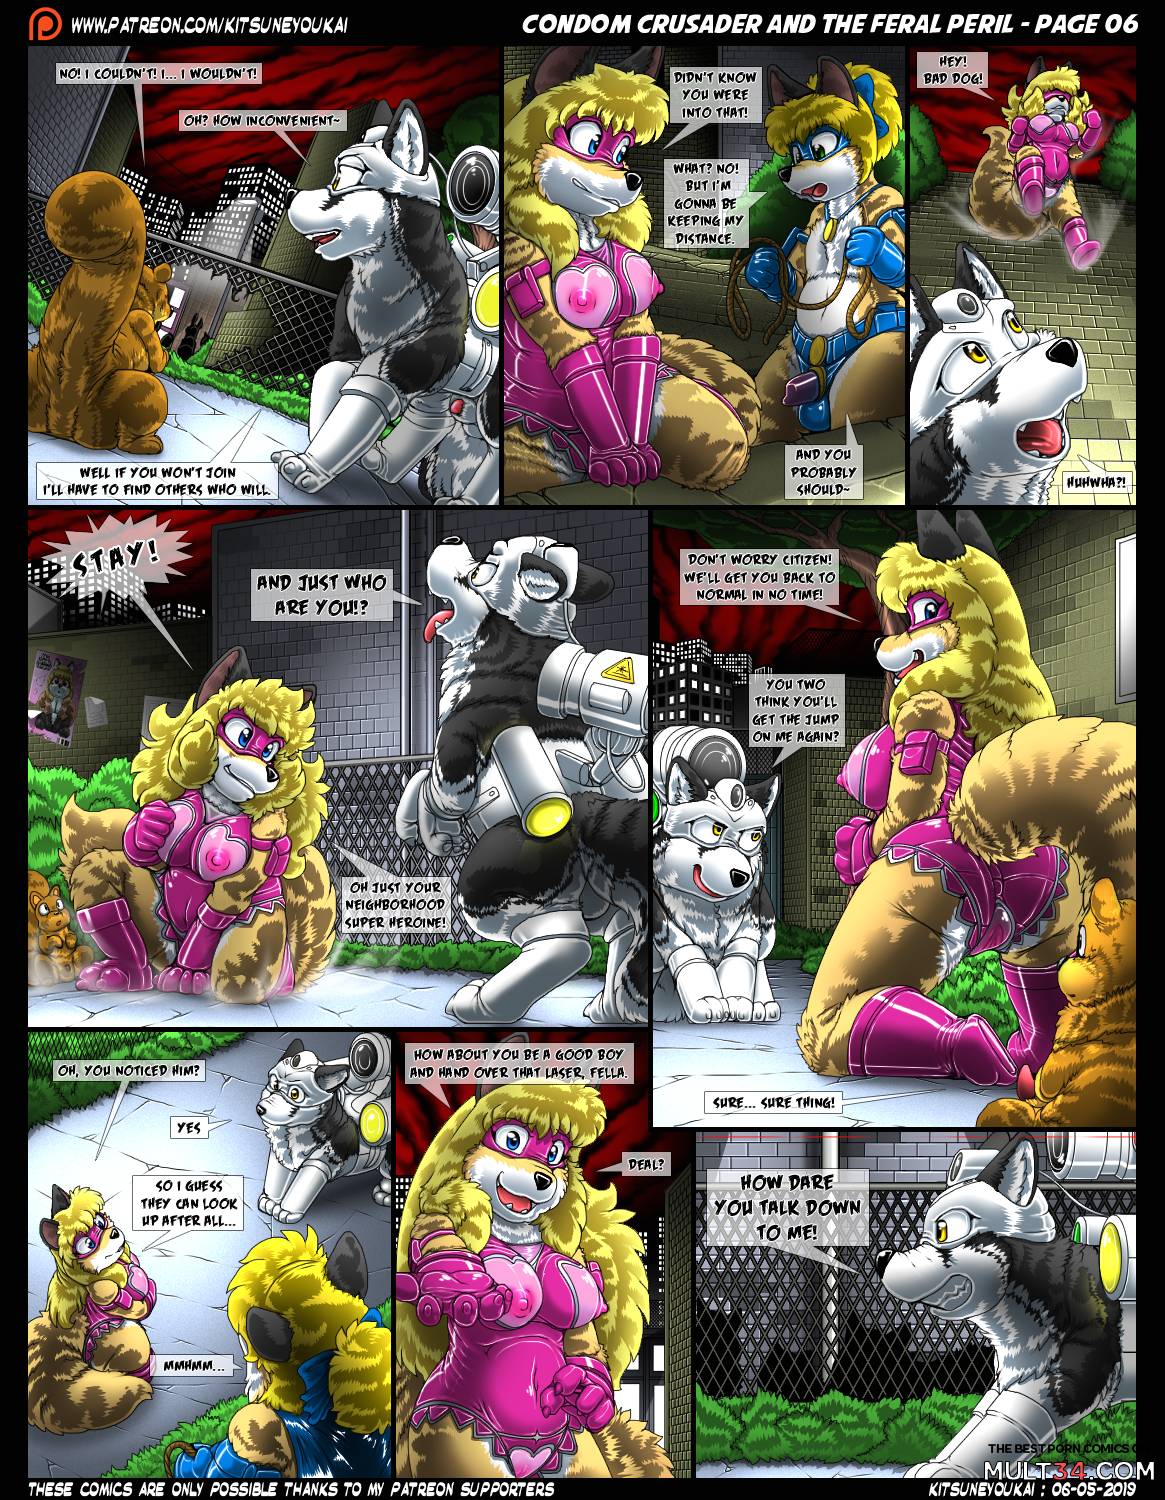 Condom Crusader and the Feral Peril page 6